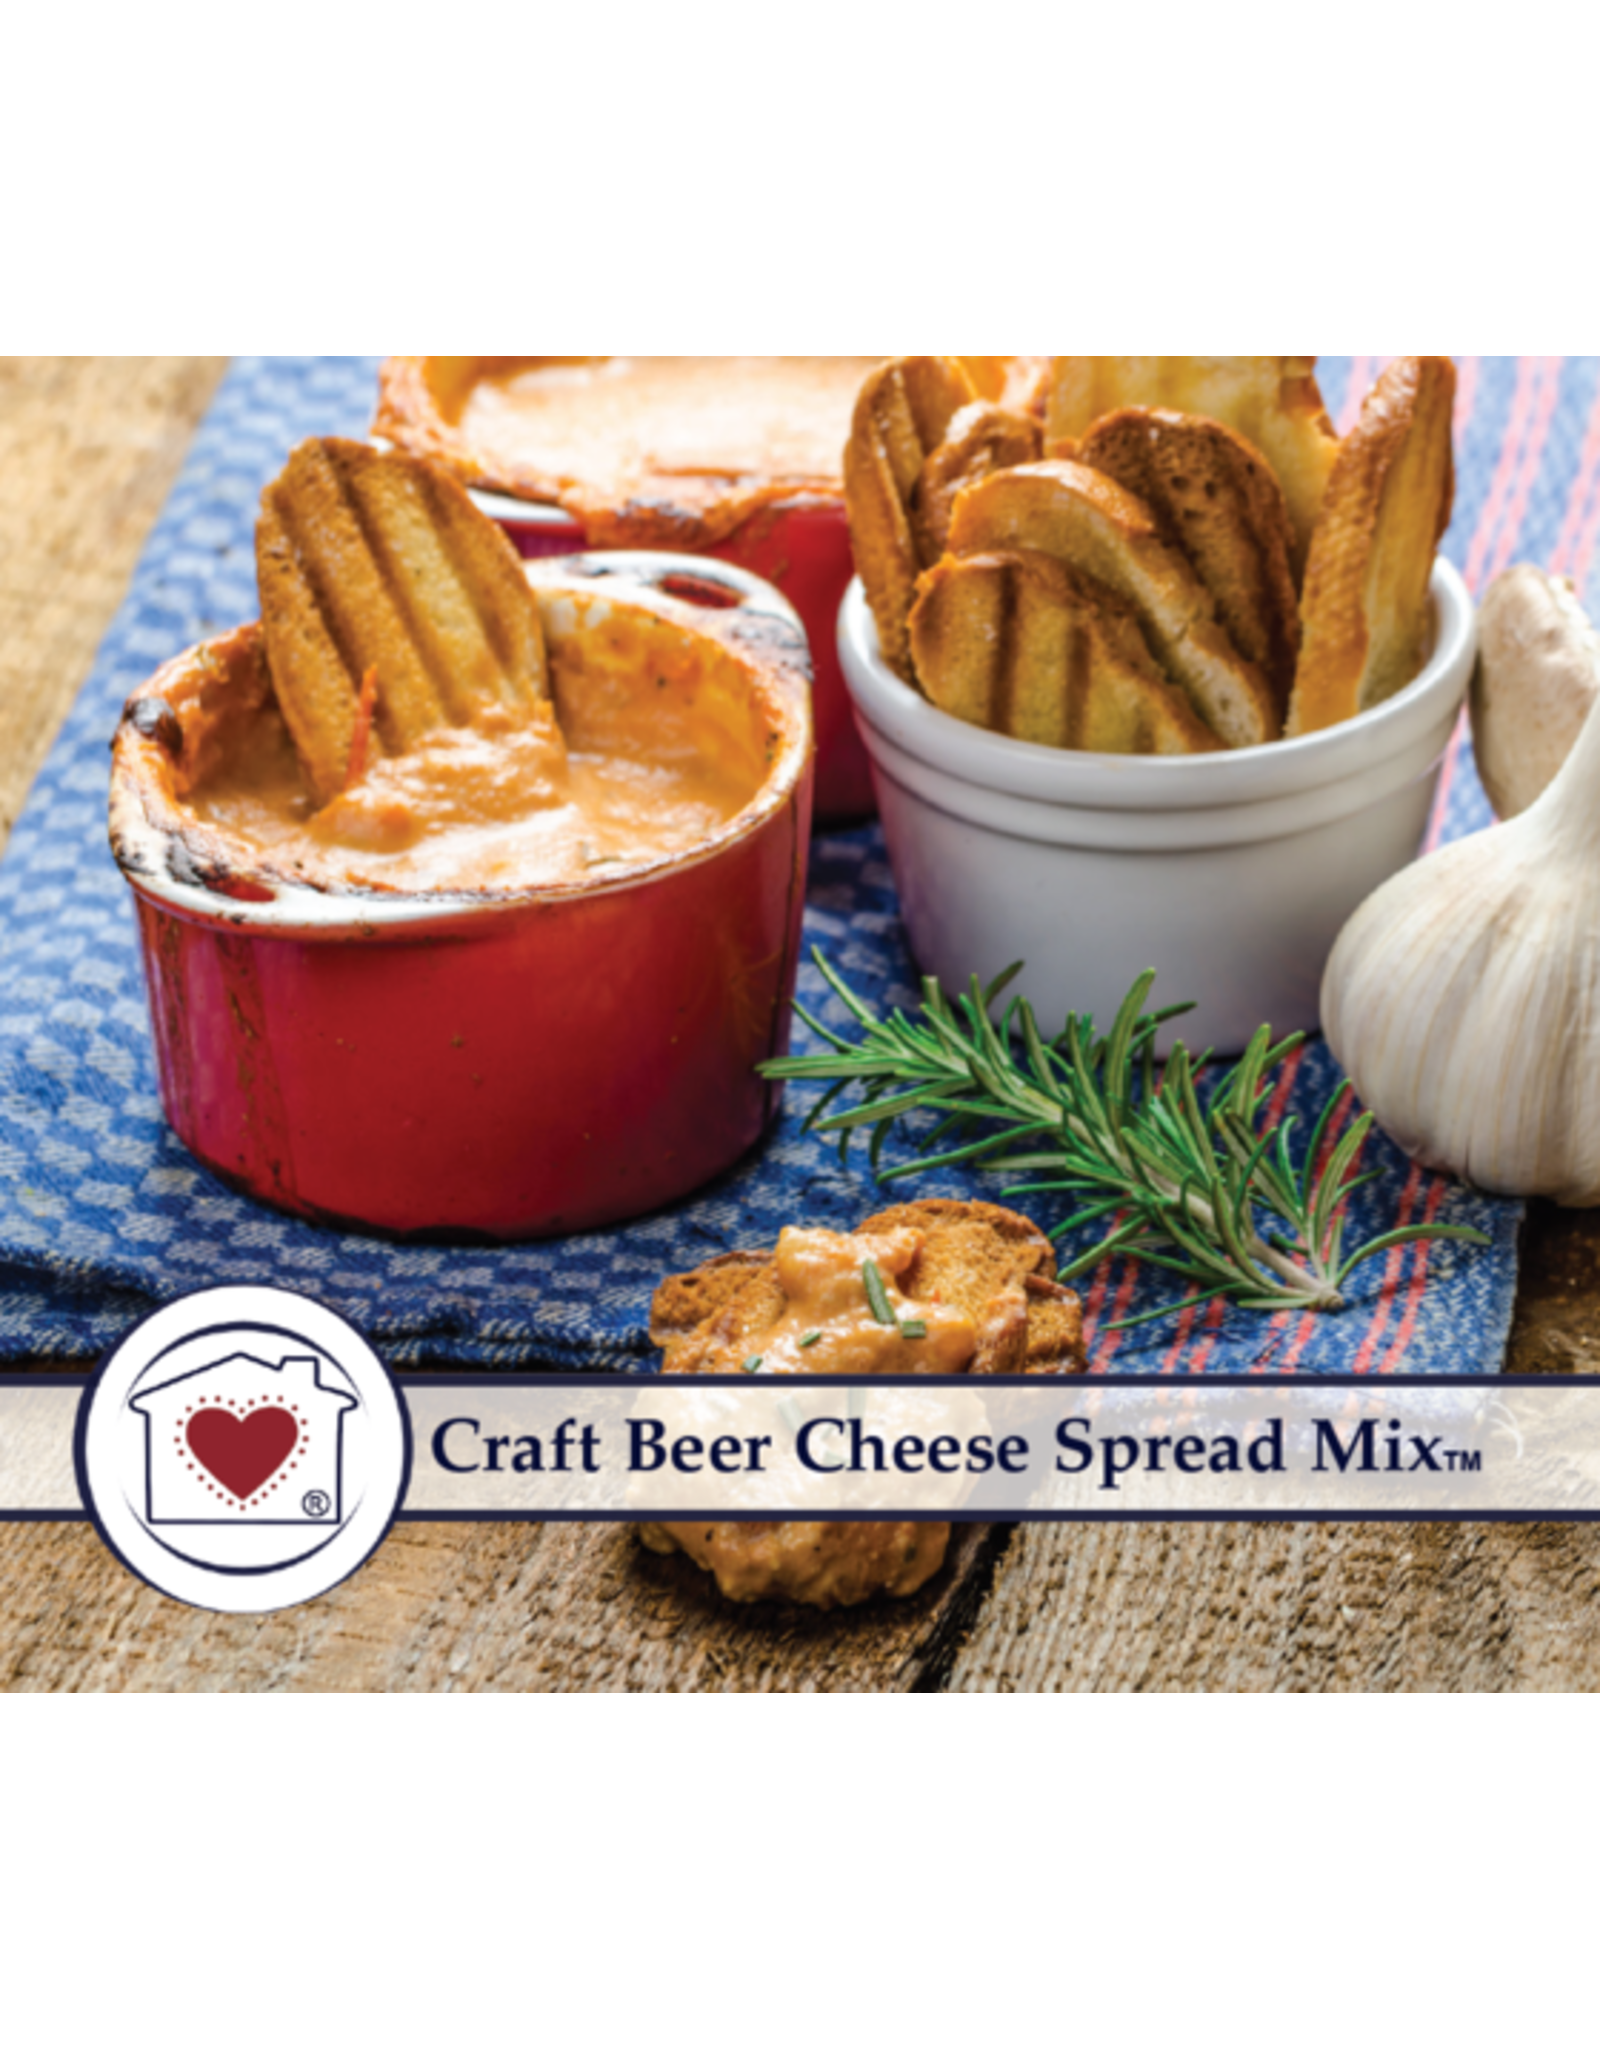 Country Home Creations CRAFT BEER CHEESE SPREAD MIX